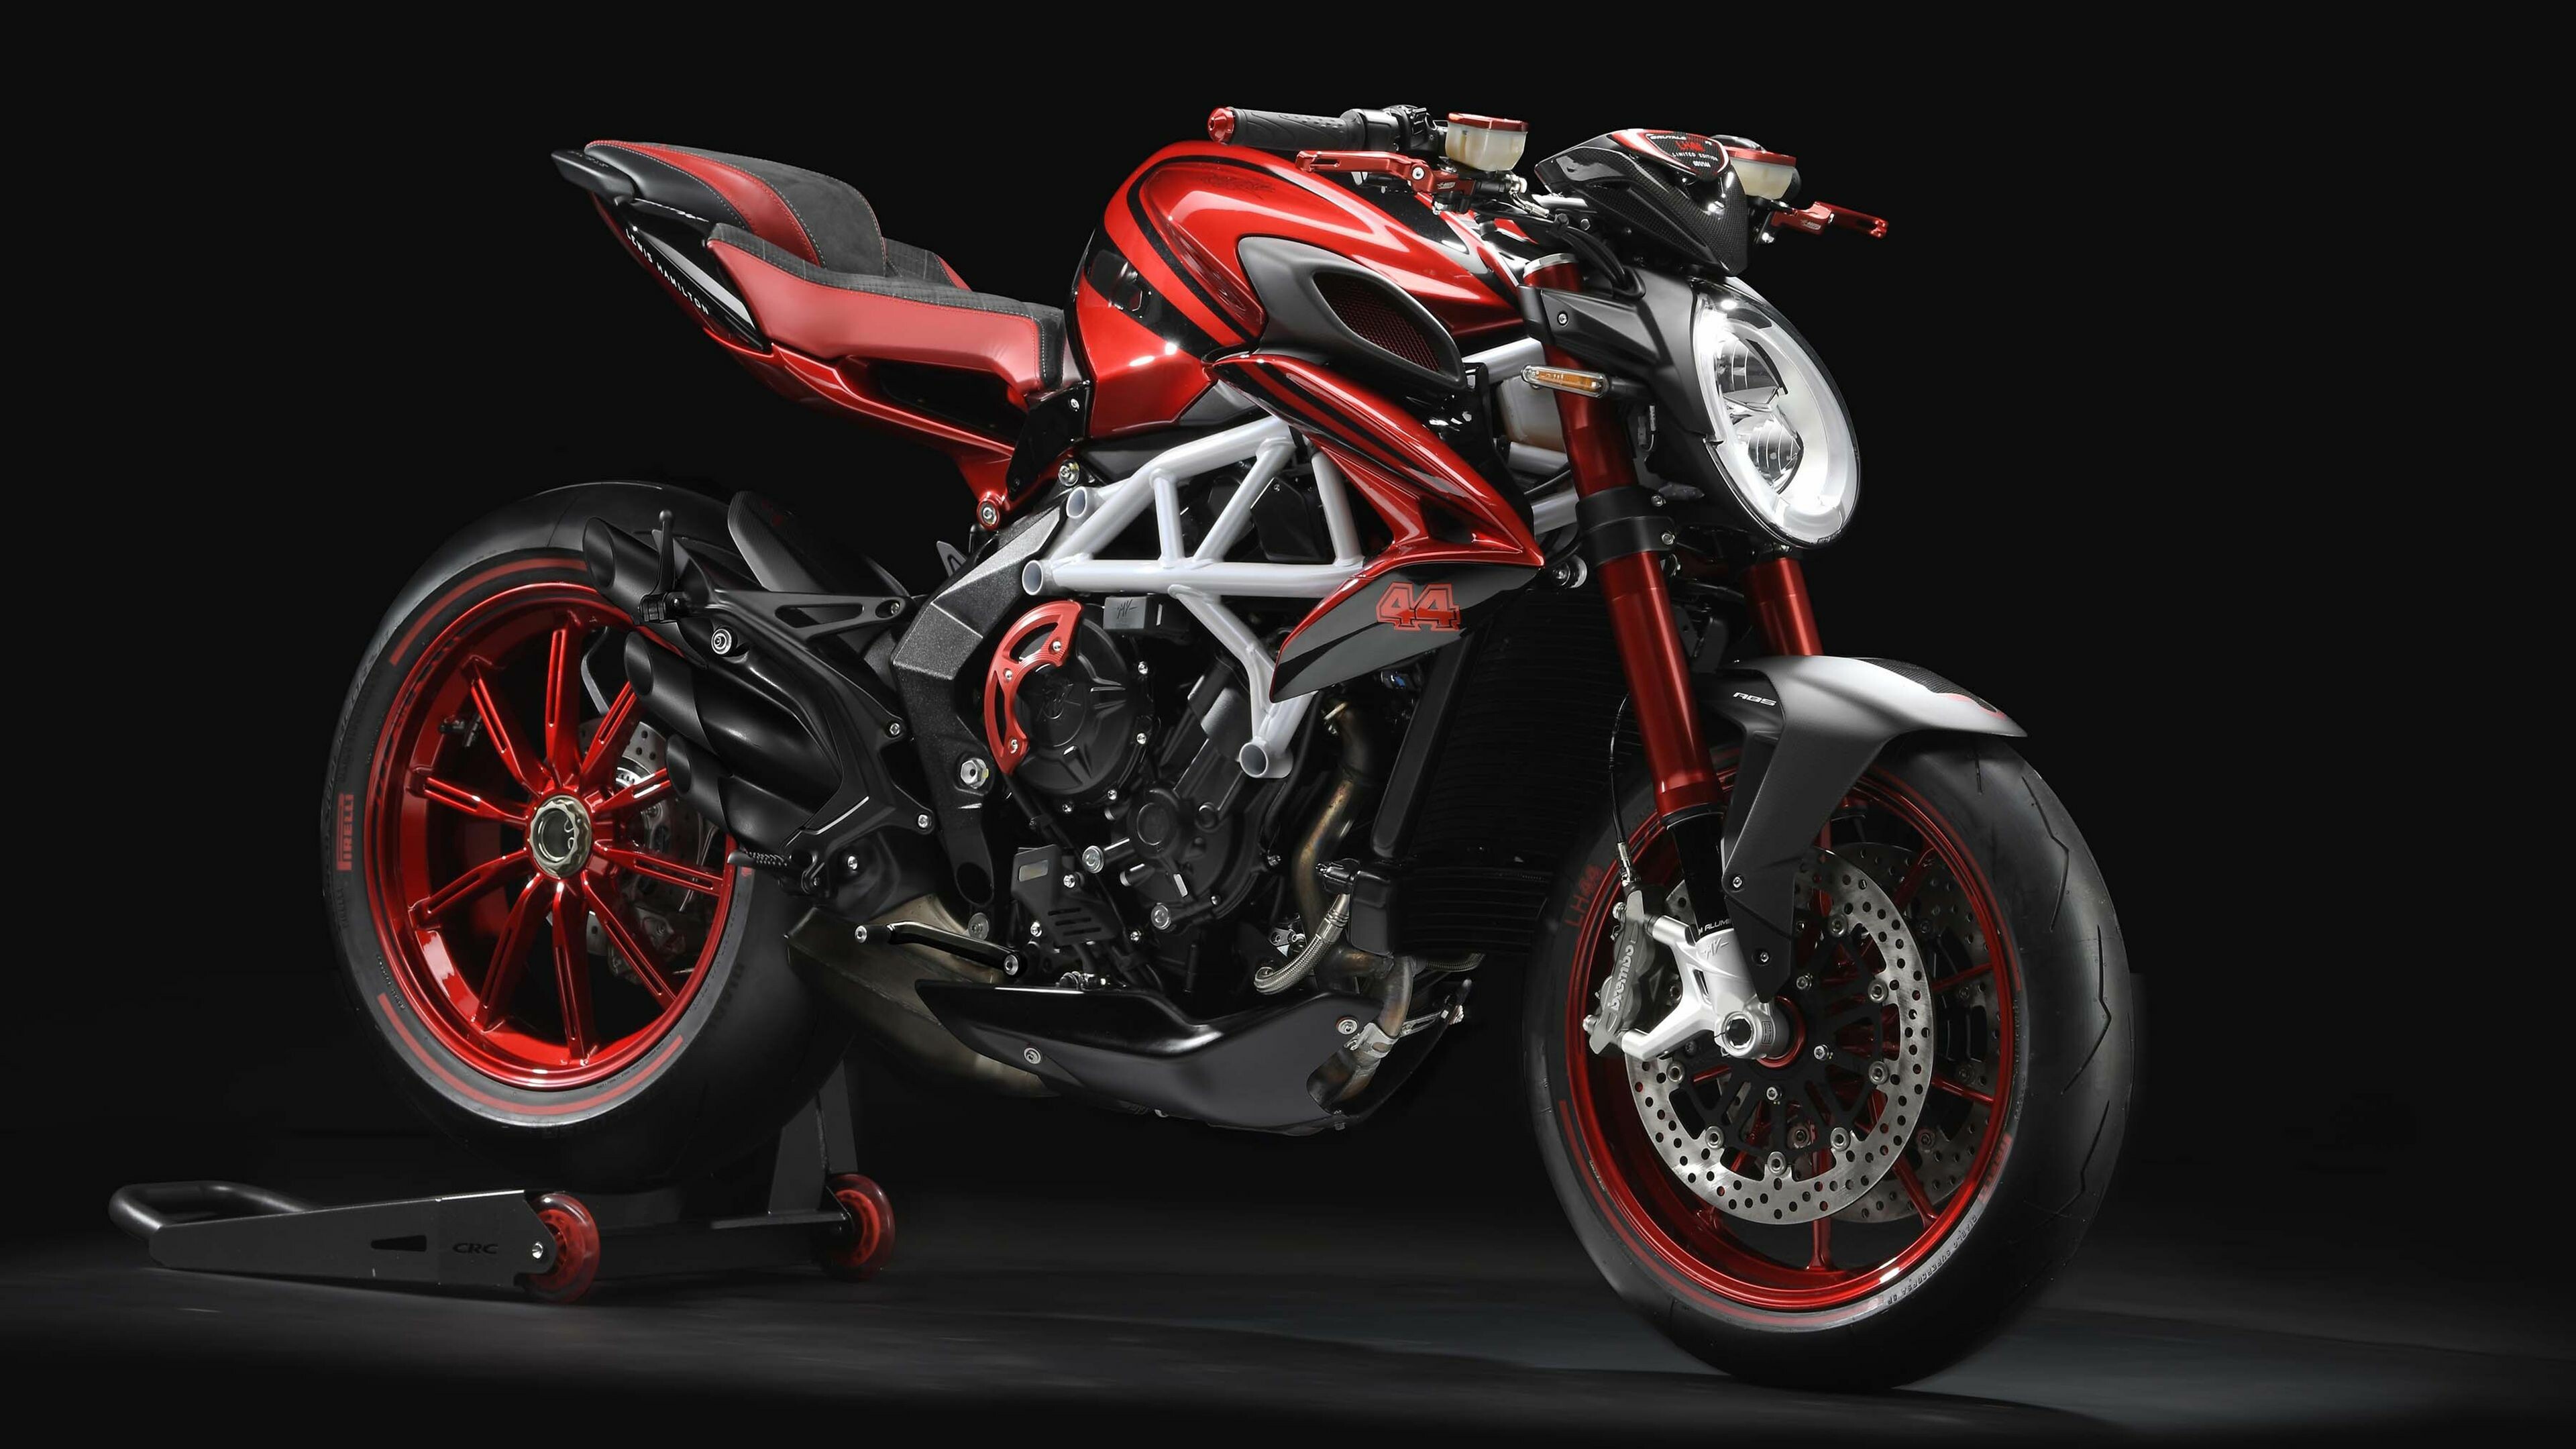 MV Agusta: Brutale, A series of motorcycles manufactured since in 2001. 3840x2160 4K Background.